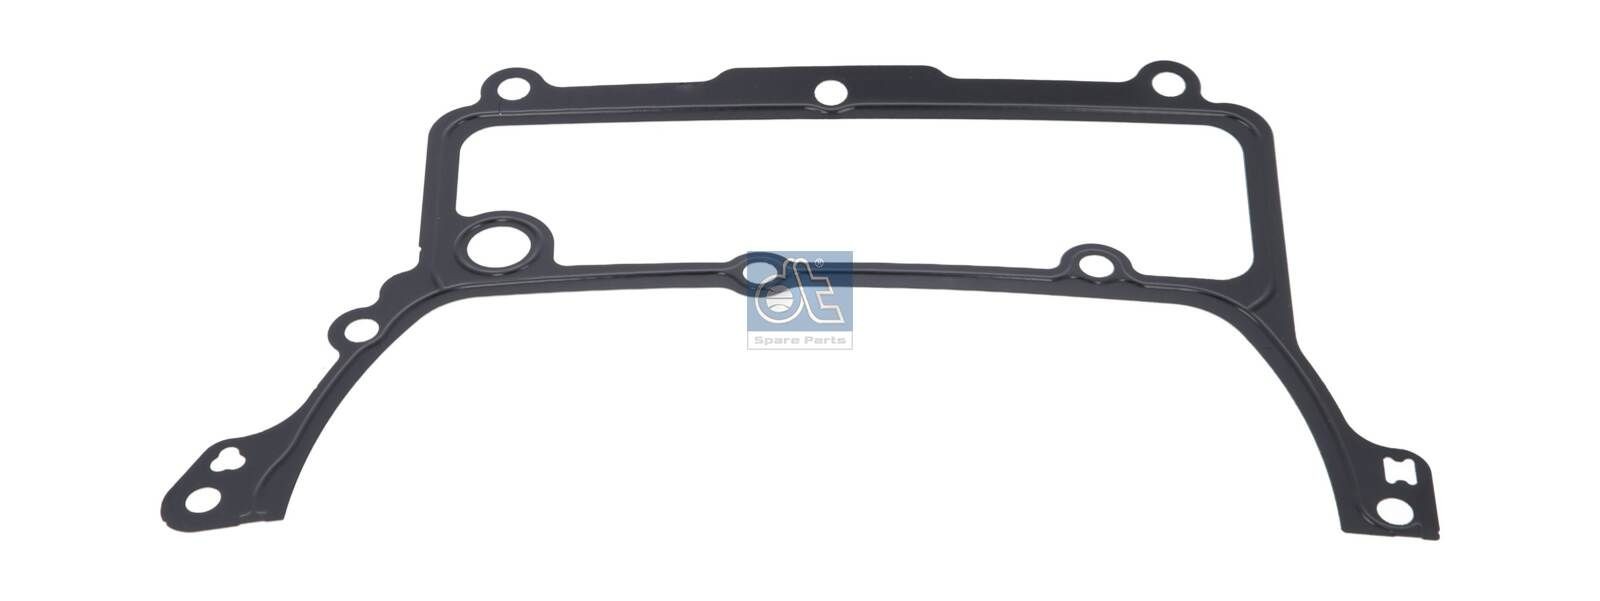 DT Spare Parts 4.20140 JEEP Timing chain cover gasket